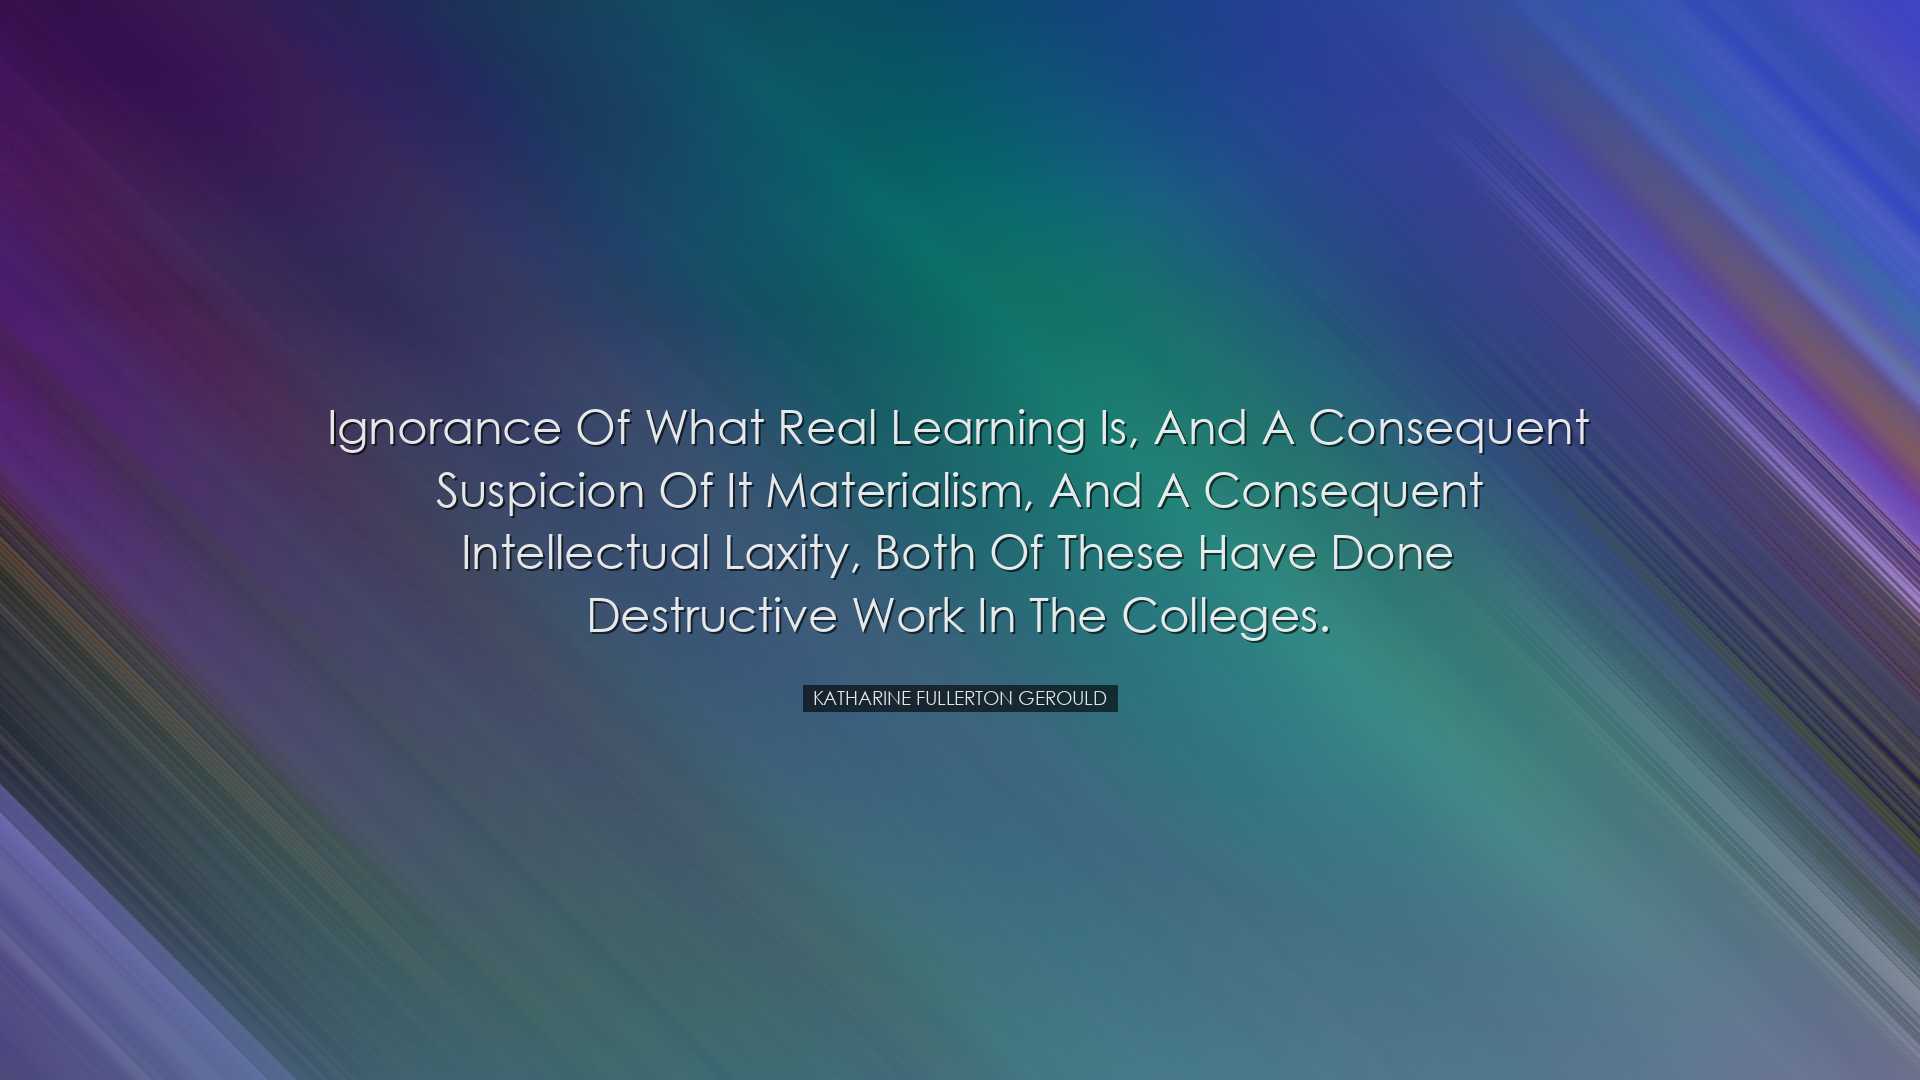 Ignorance of what real learning is, and a consequent suspicion of